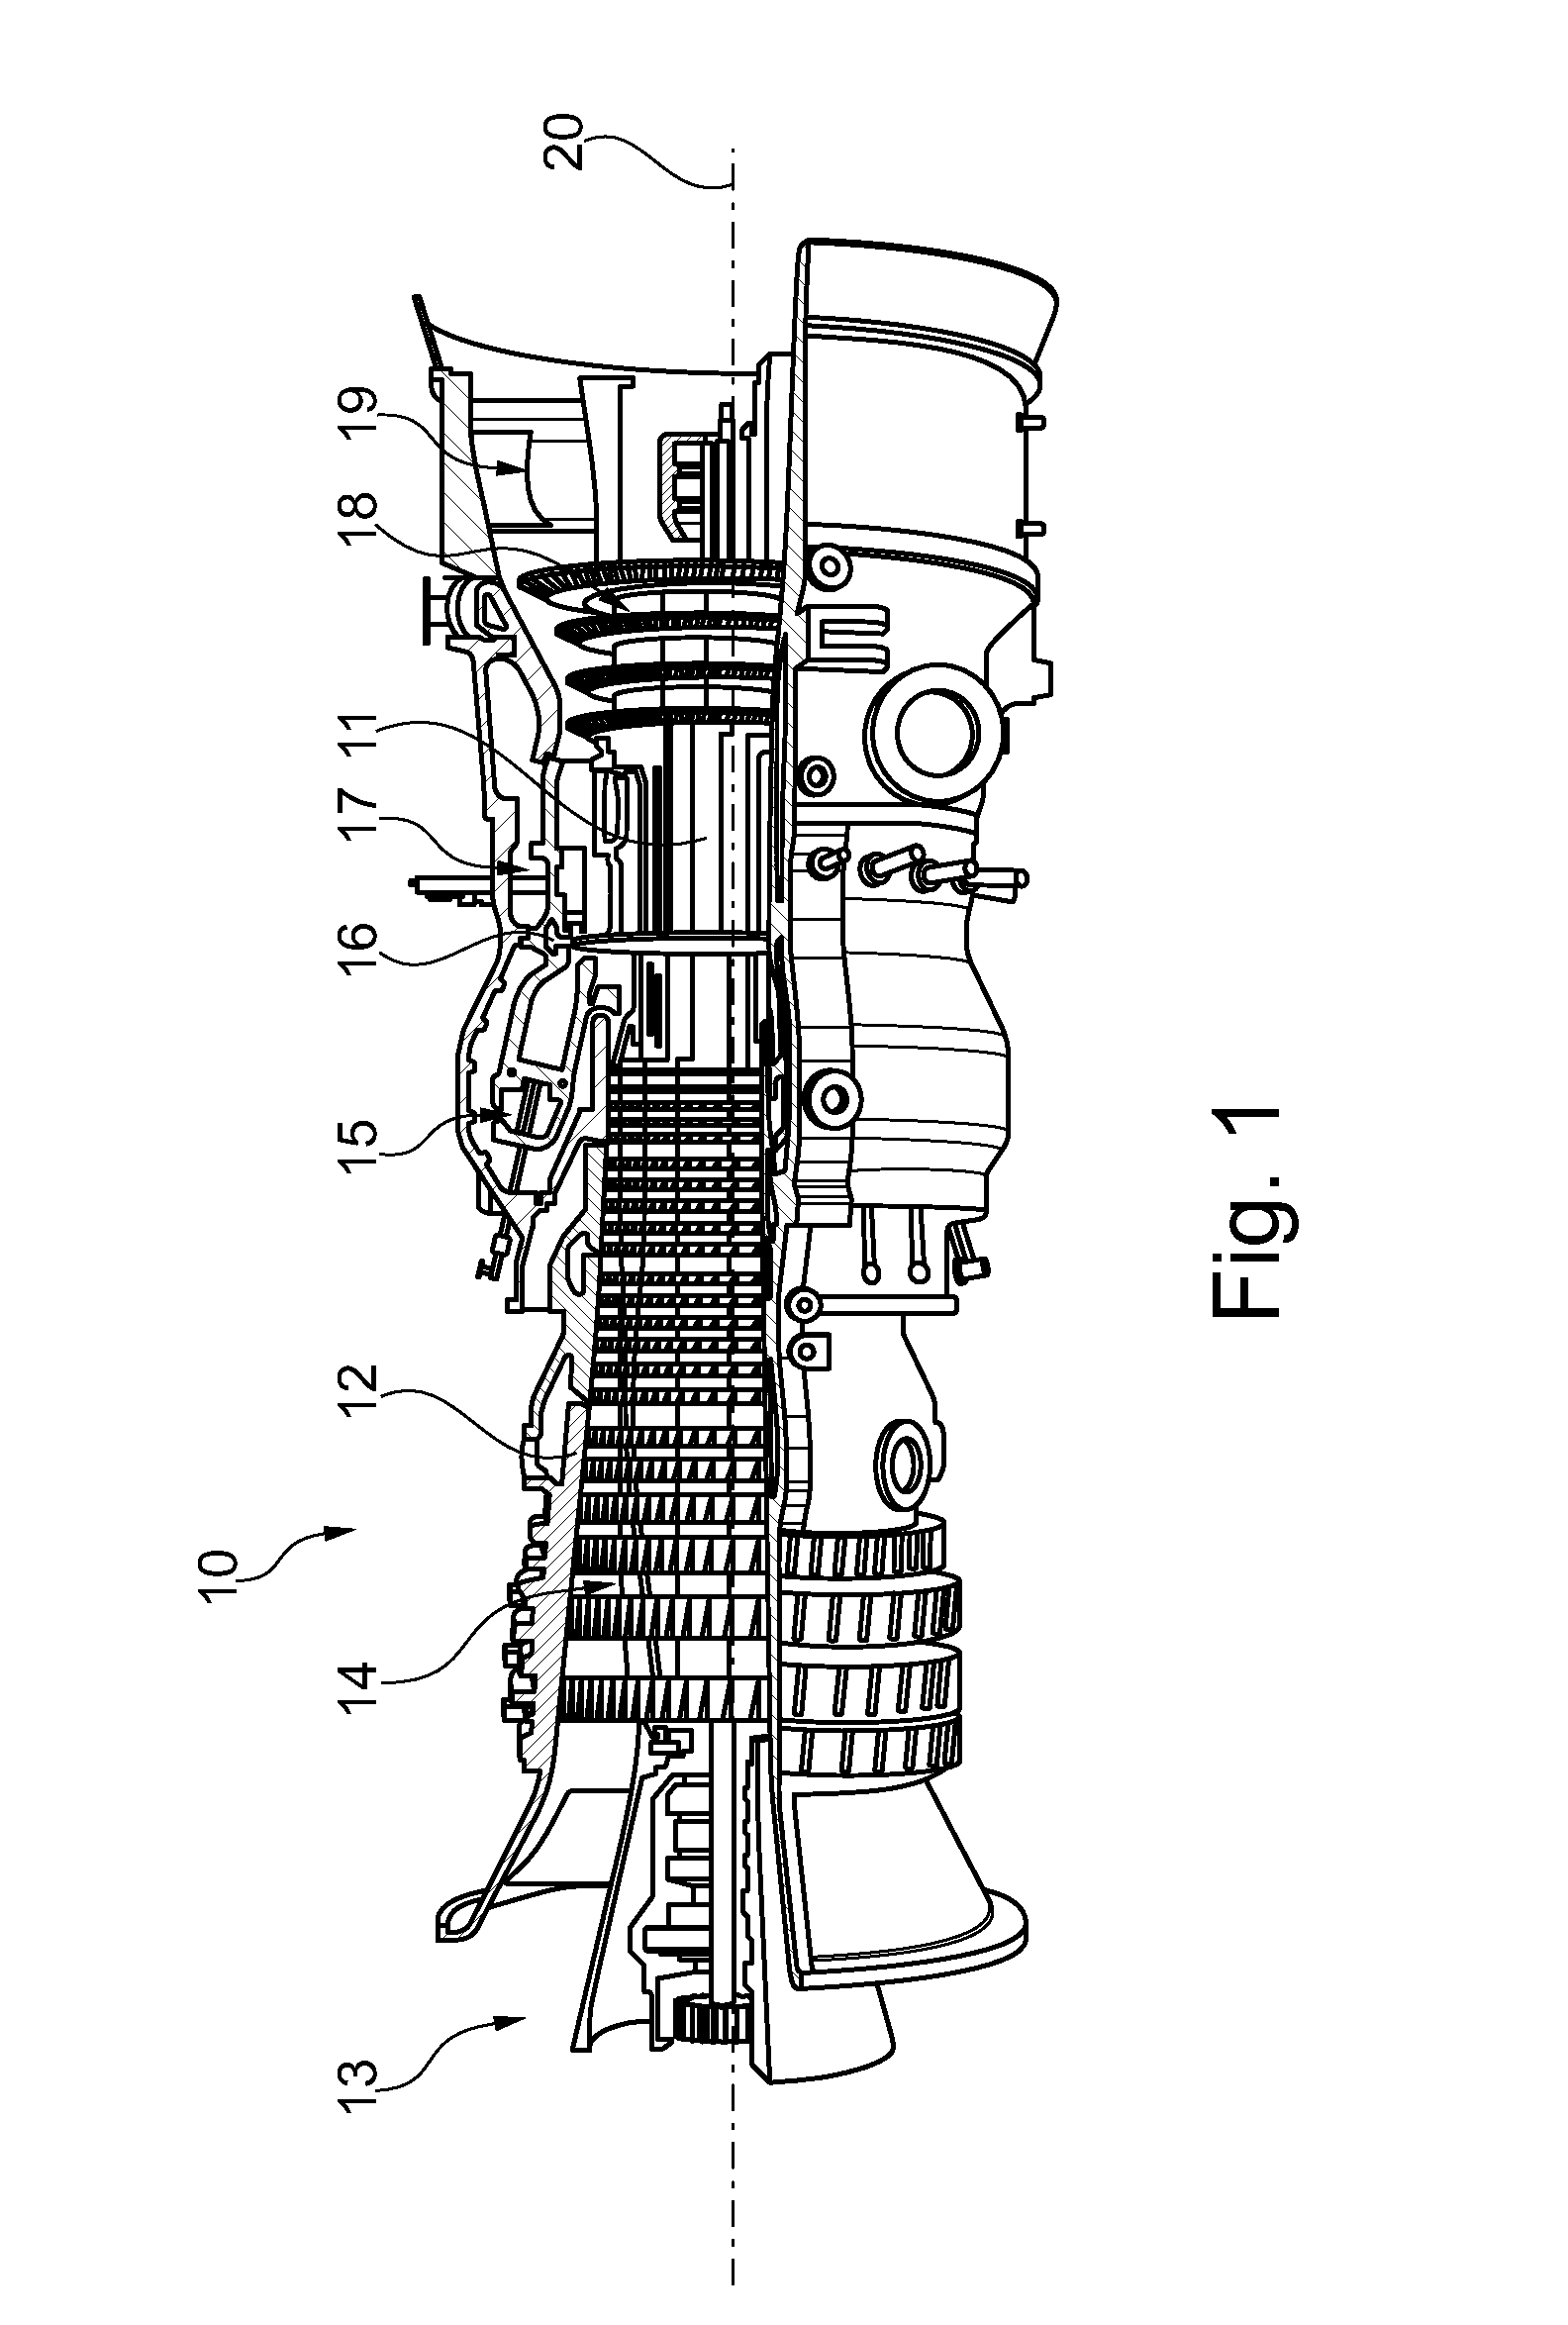 Fuel lance cooling for a gas turbine with sequential combustion